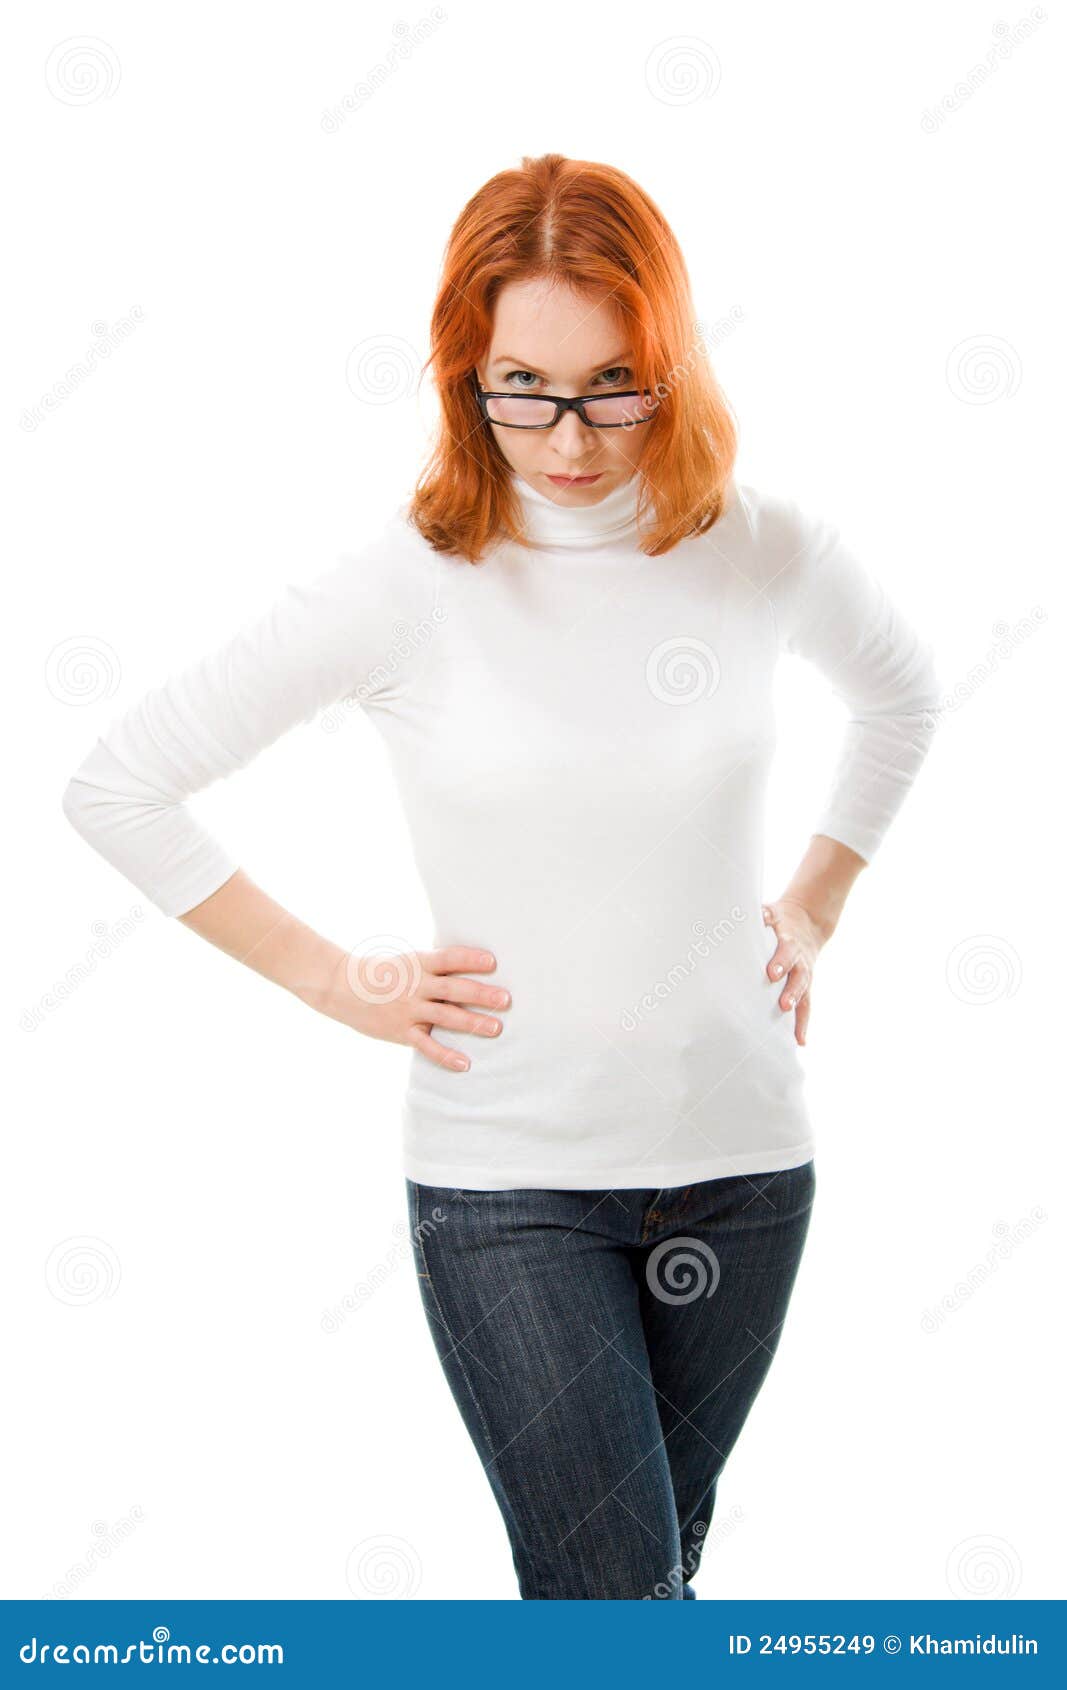 Strict Girl With Red Hair Wearing Glasses Stock Image